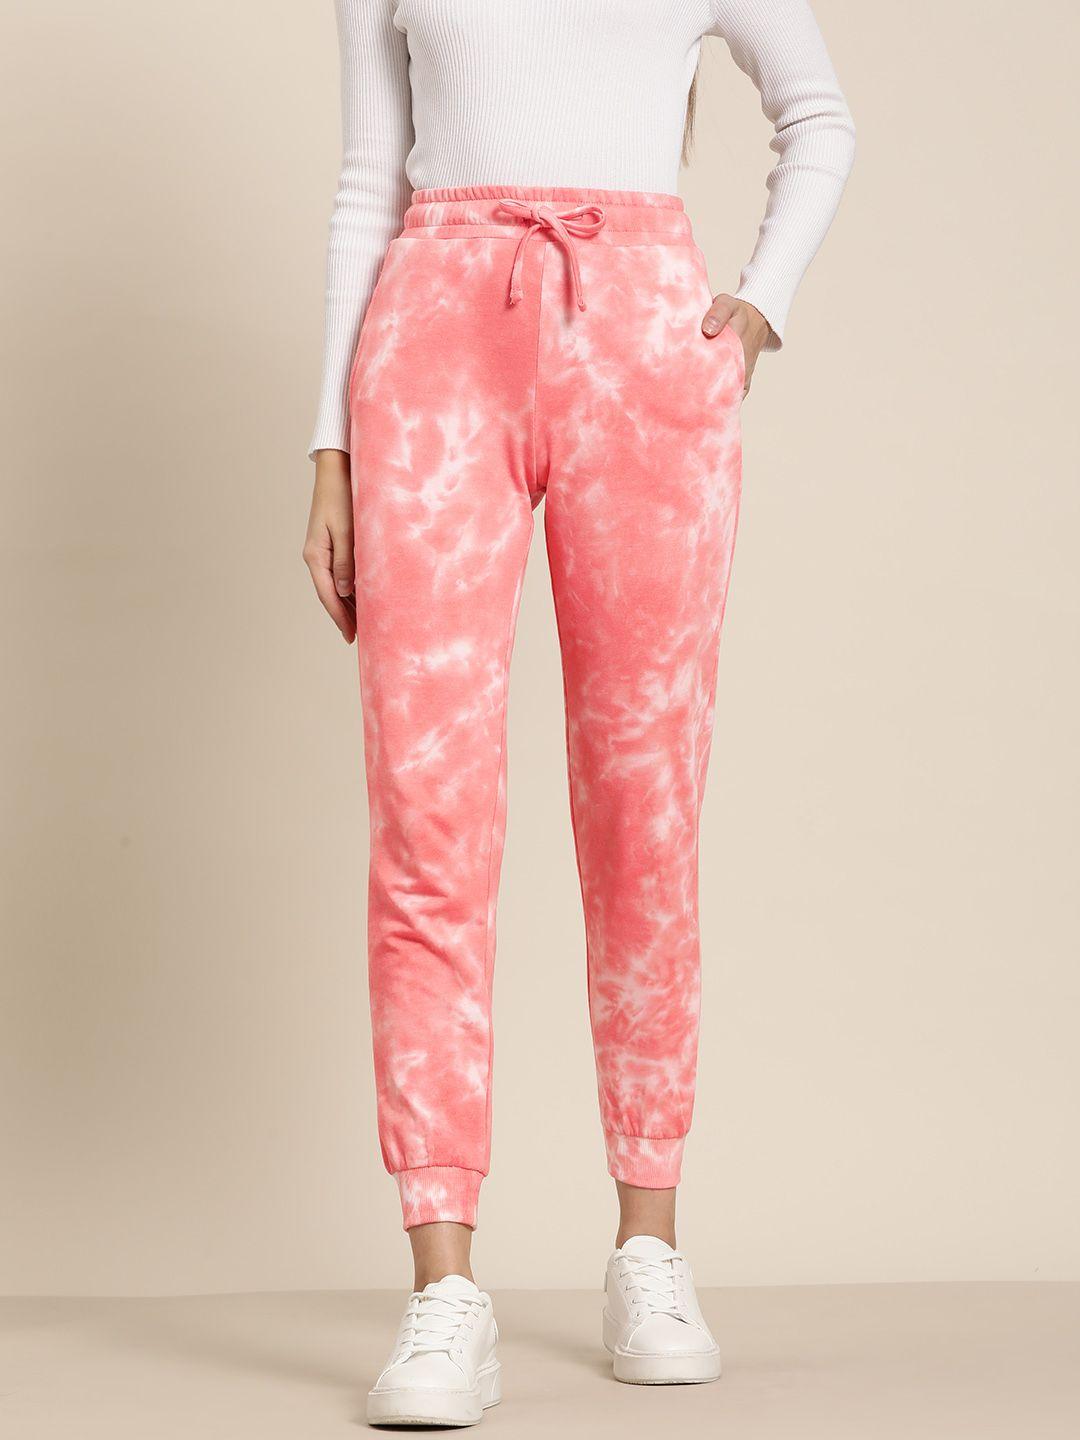 her by invictus tie & dye dyed regular fit joggers